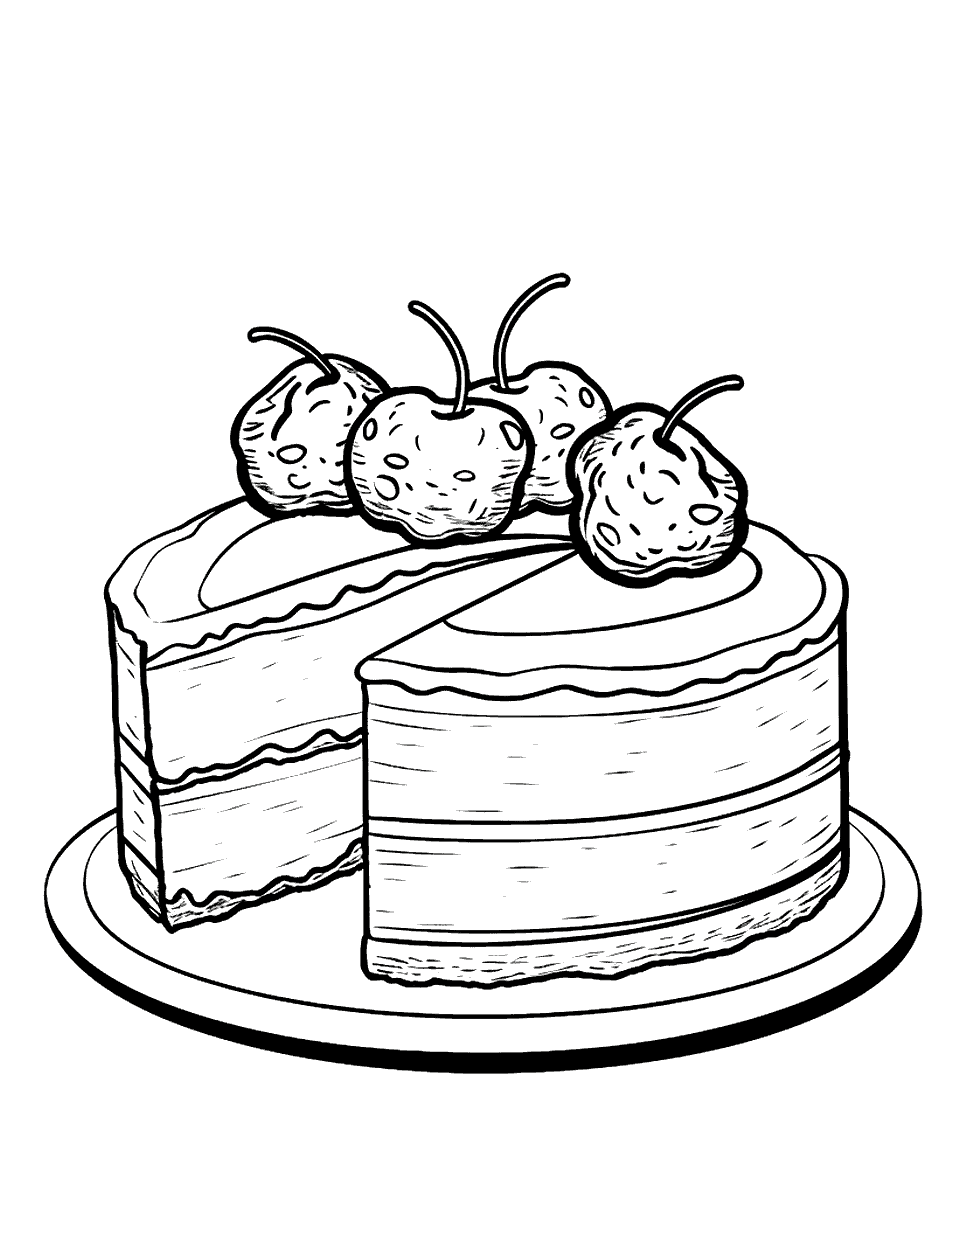 Cheesecake Treat Cake Coloring Page - A classic cheesecake with a graham cracker crust and a berry topping.